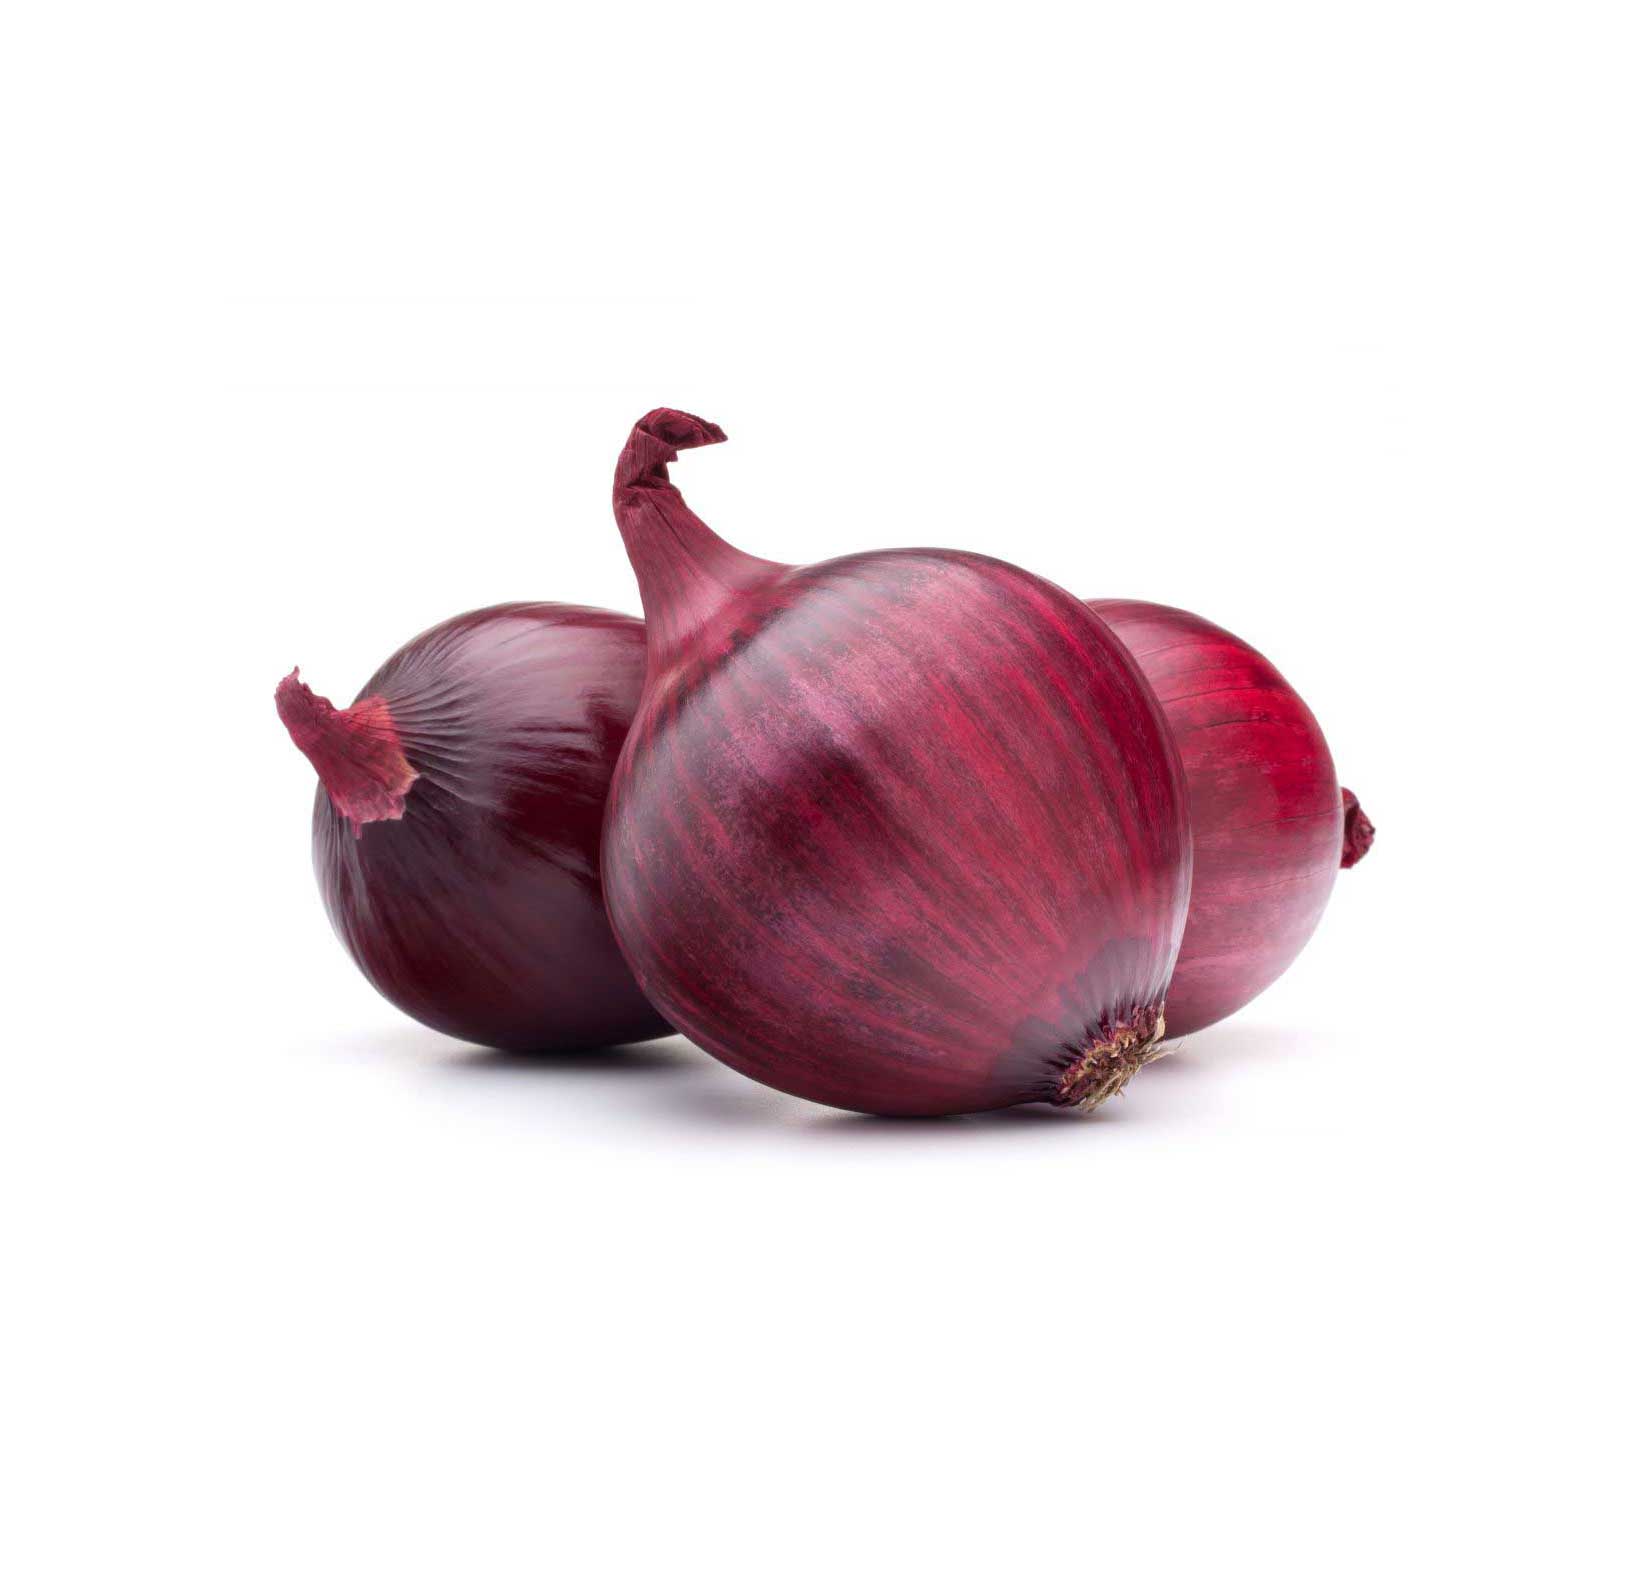 La Légumière, the specialist in Breton and seasonal vegetables! Red onion